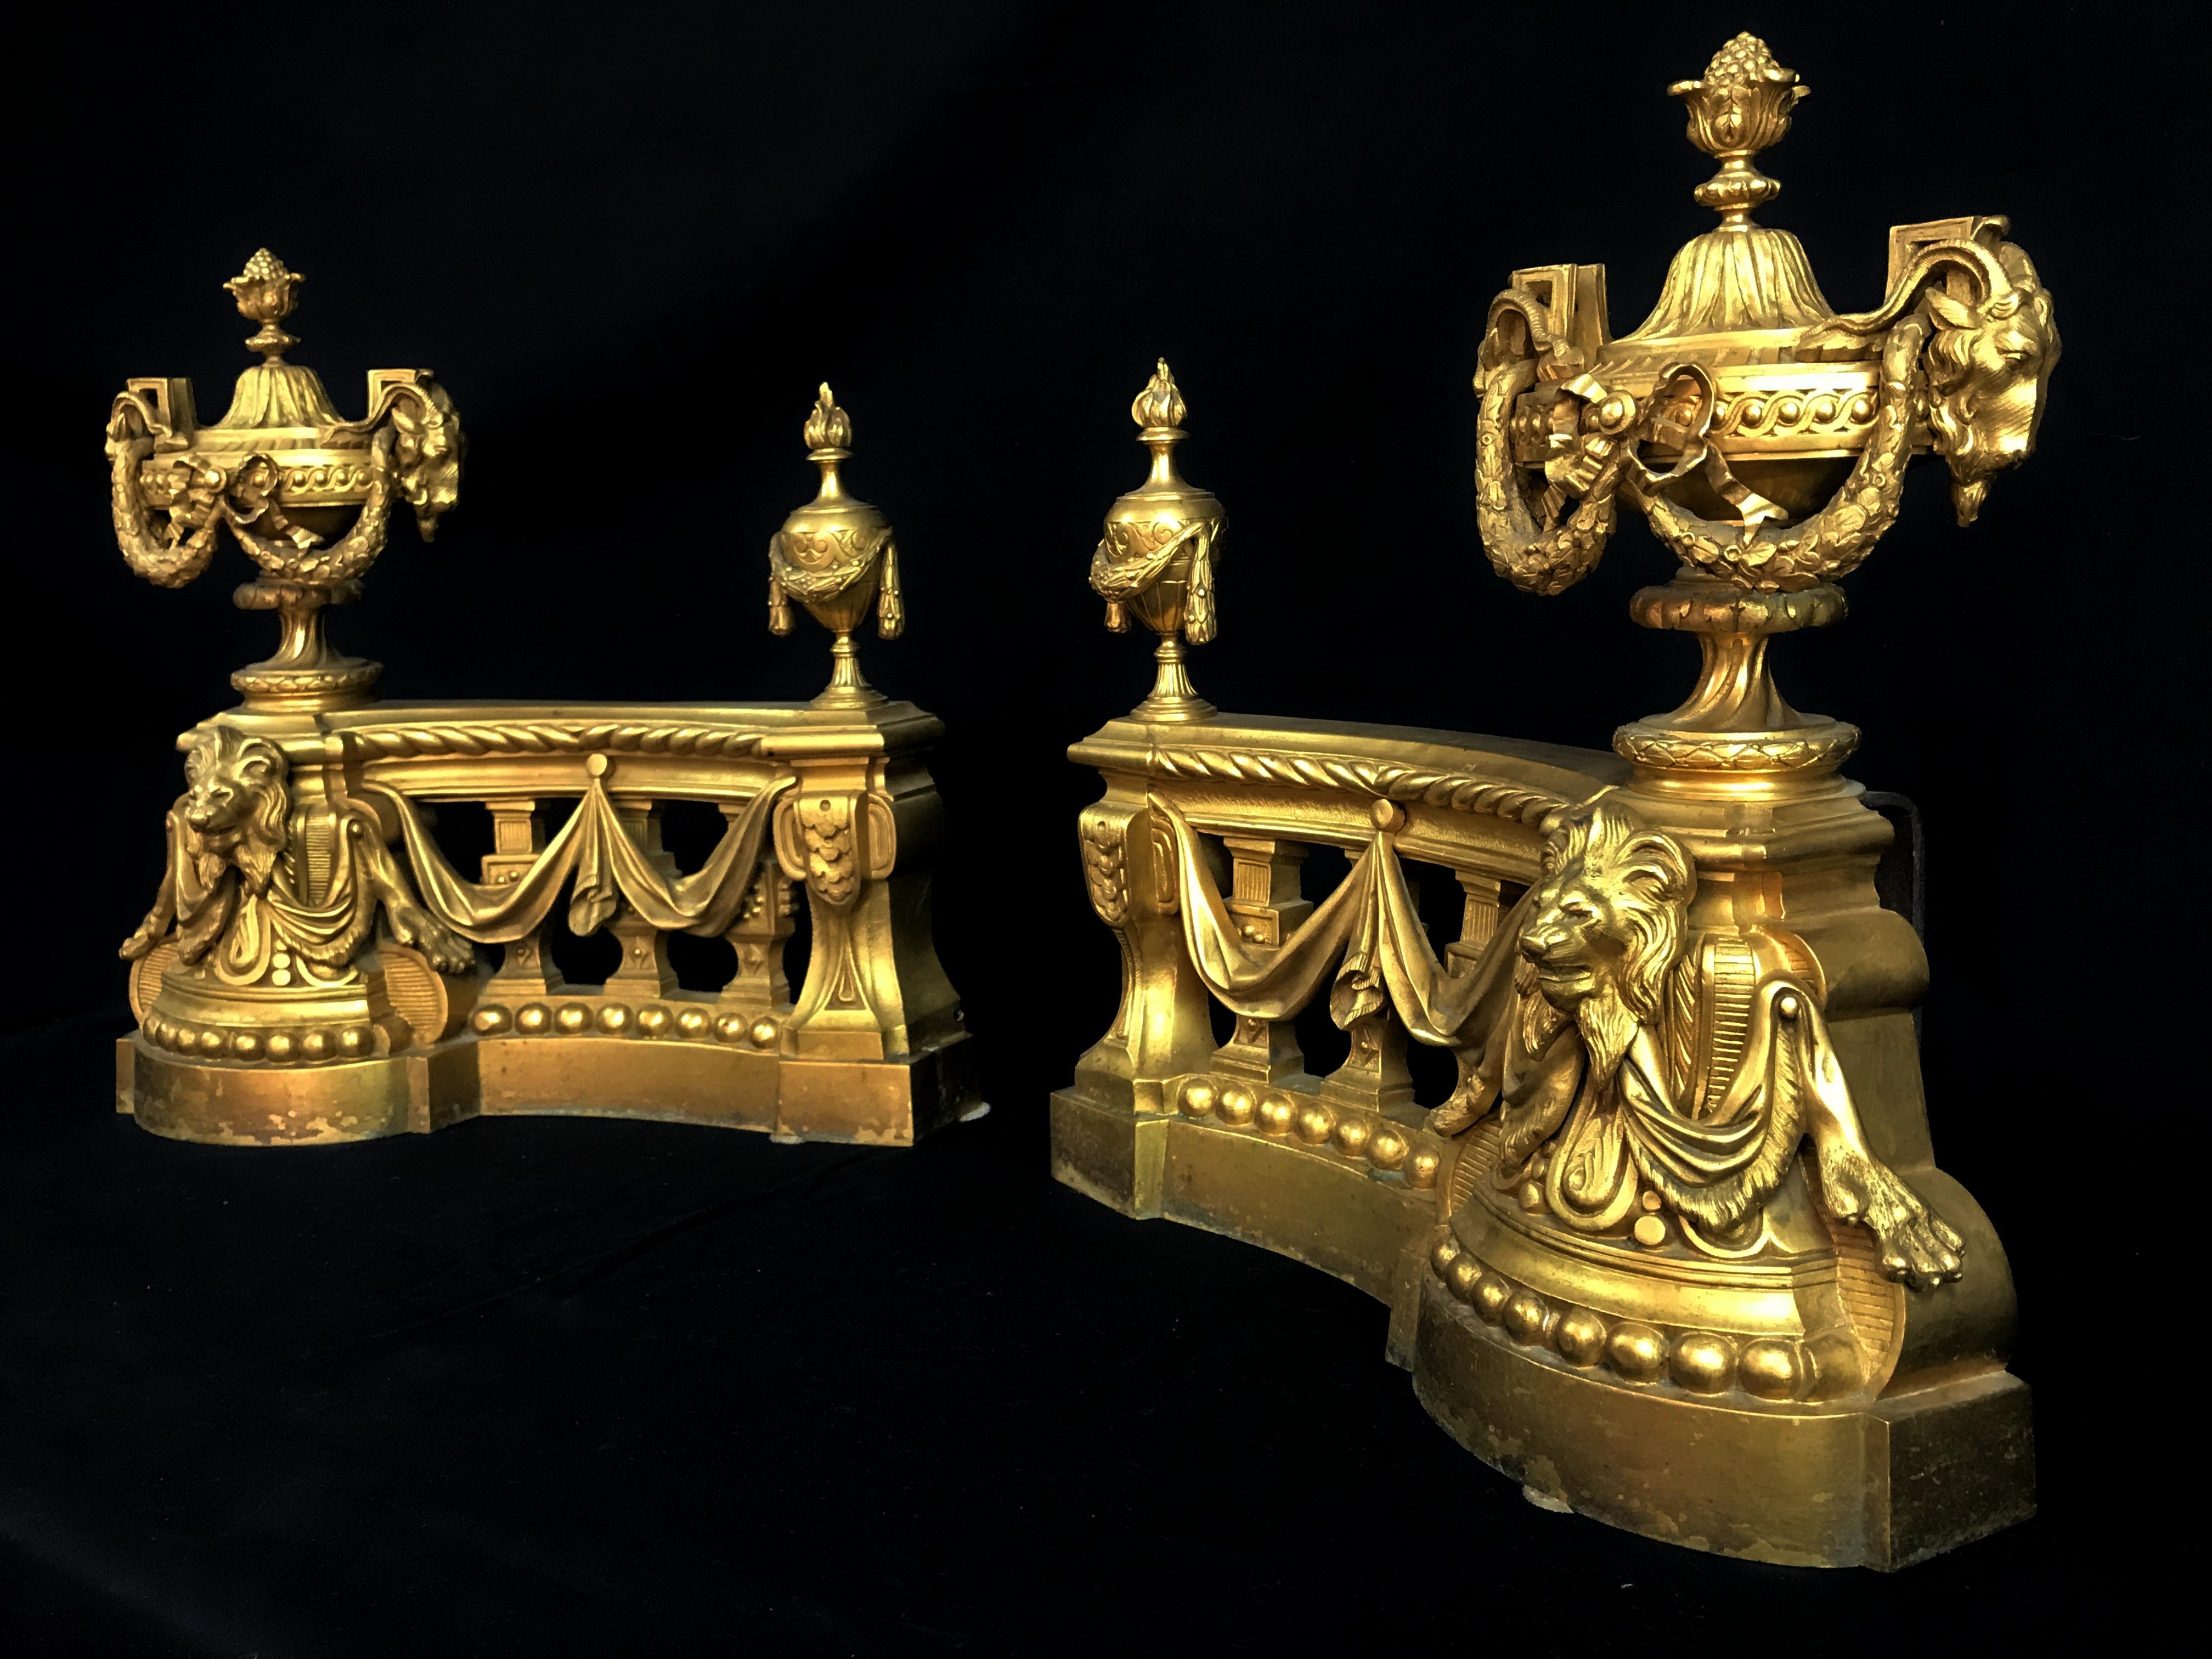 18th century, pair of French gilt bronze fireplace chenets
This valuable pair of fireplace chenets was made circa end of the 18th century in France. The fireplace chenets are in finely chiselled and gilded bronze and have ornaments and decorations